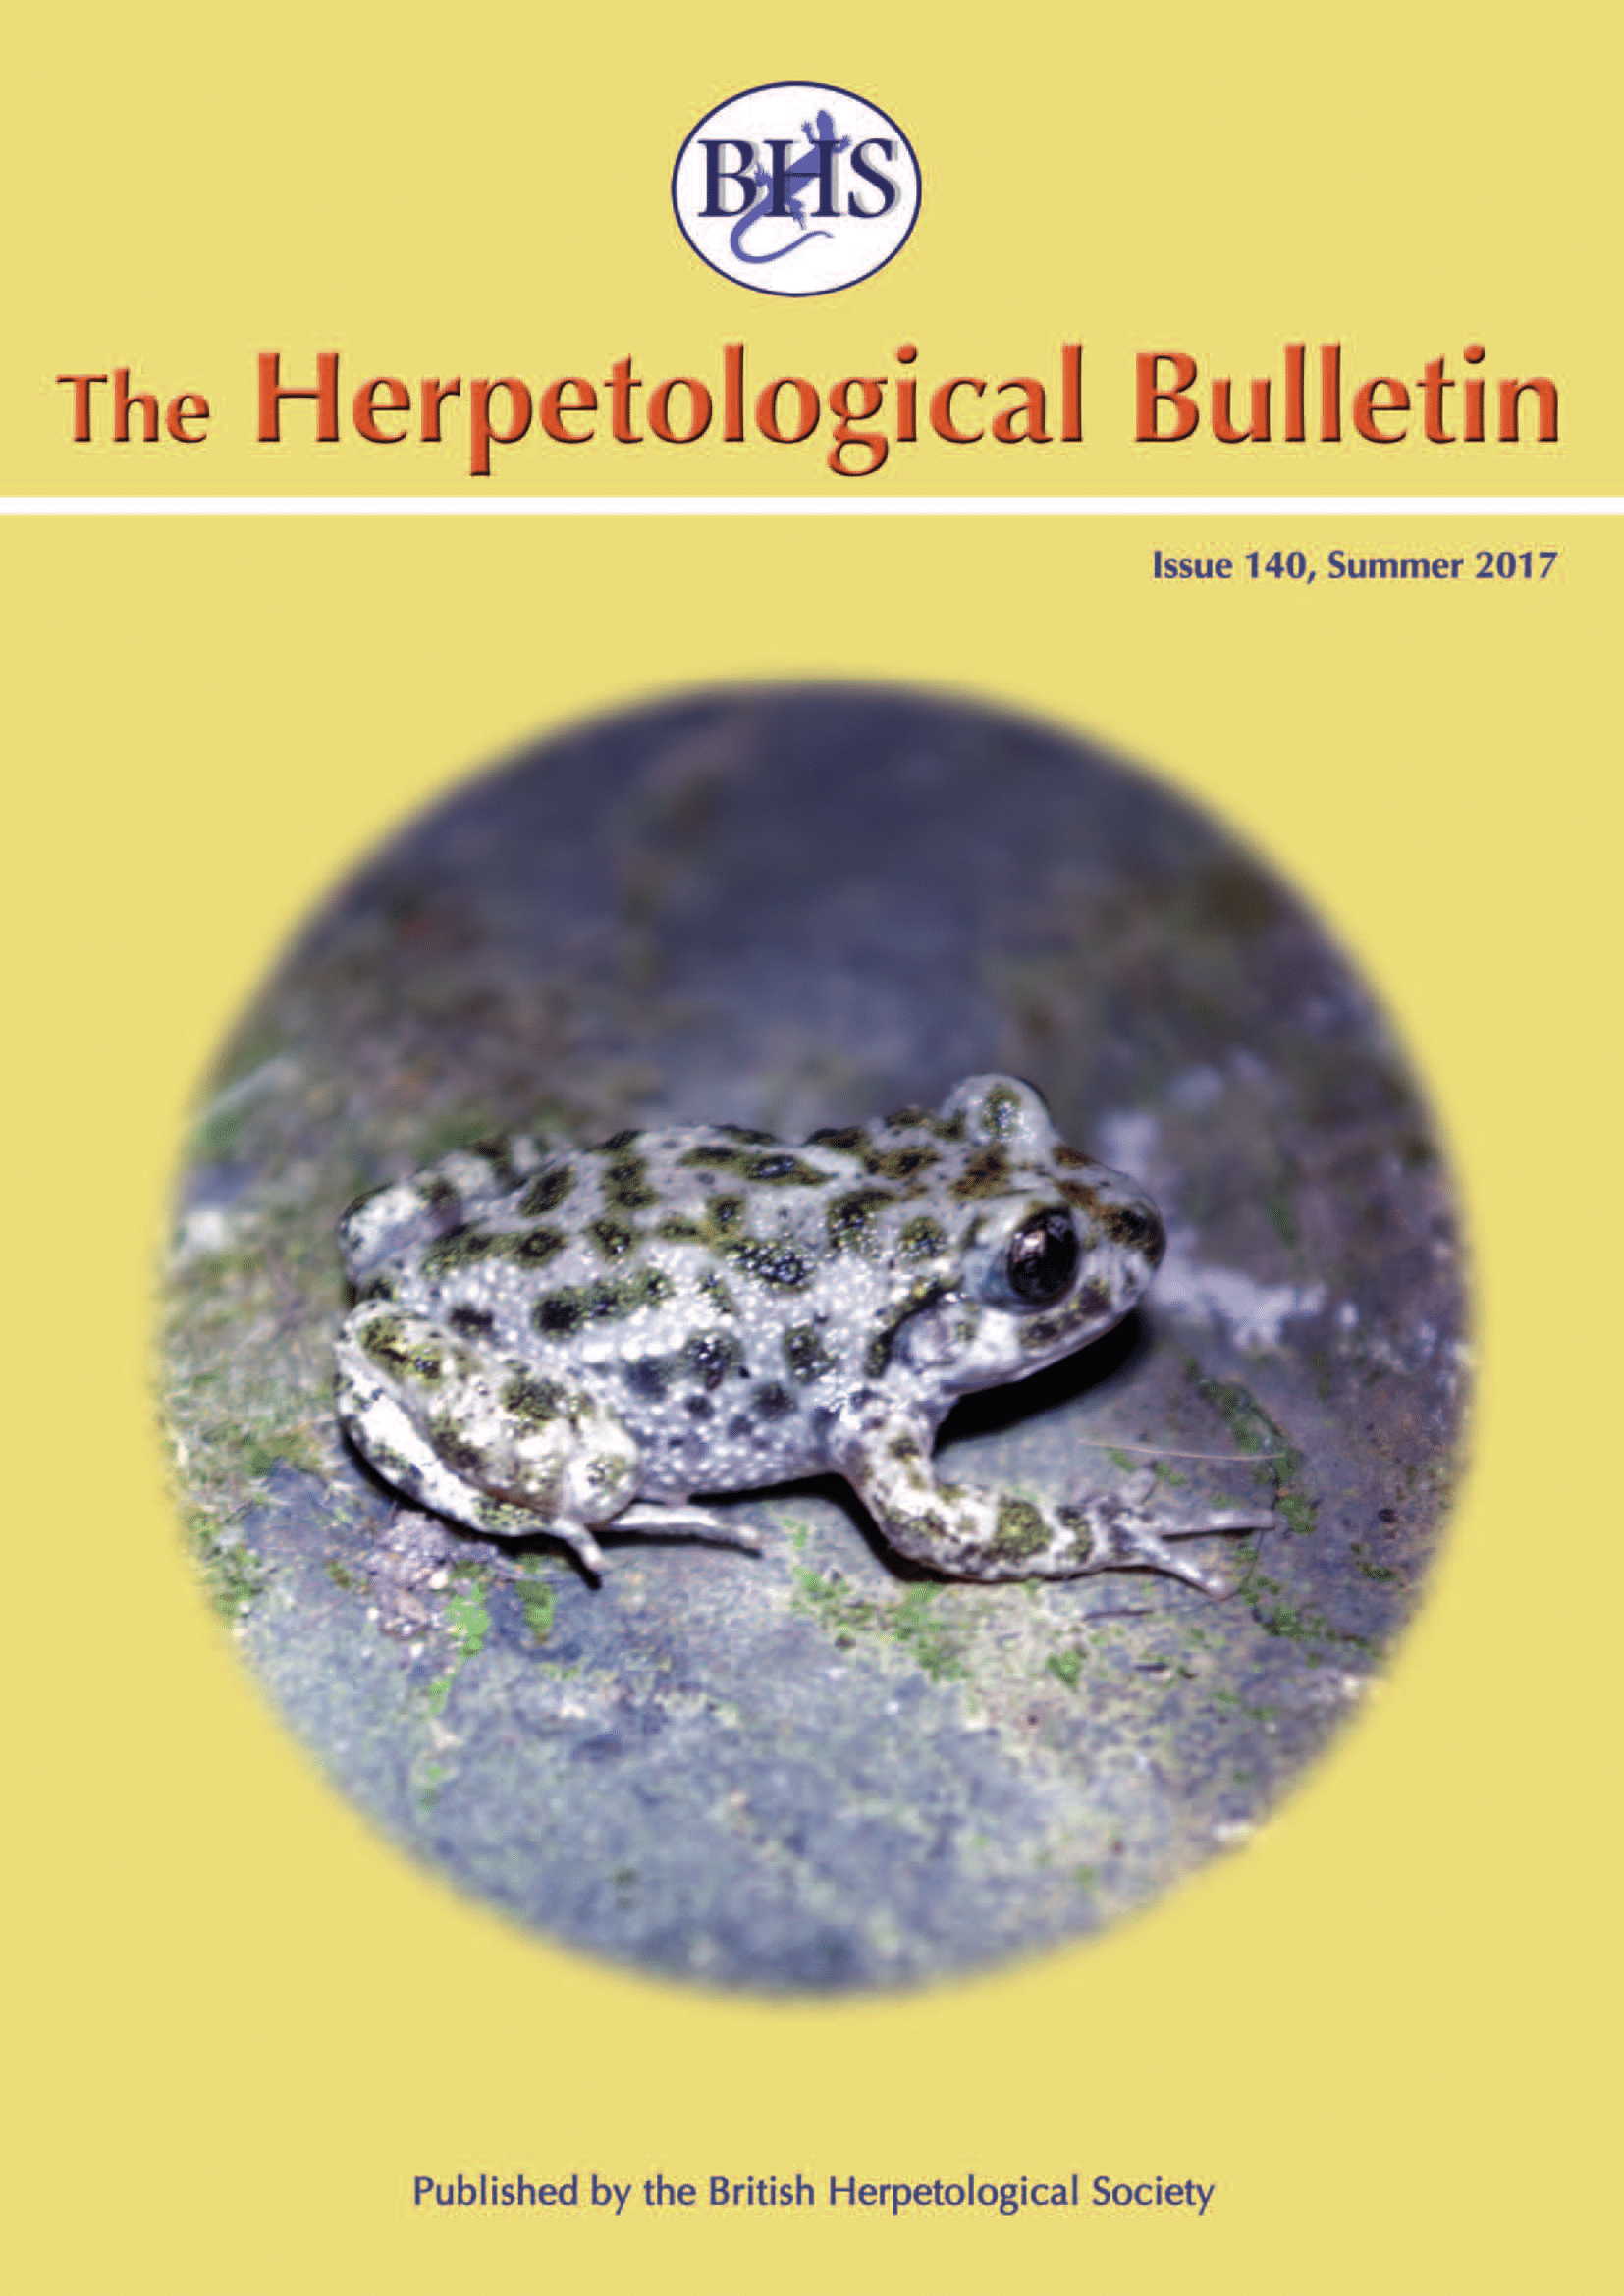 The Herpetological Bulletin Issue 140